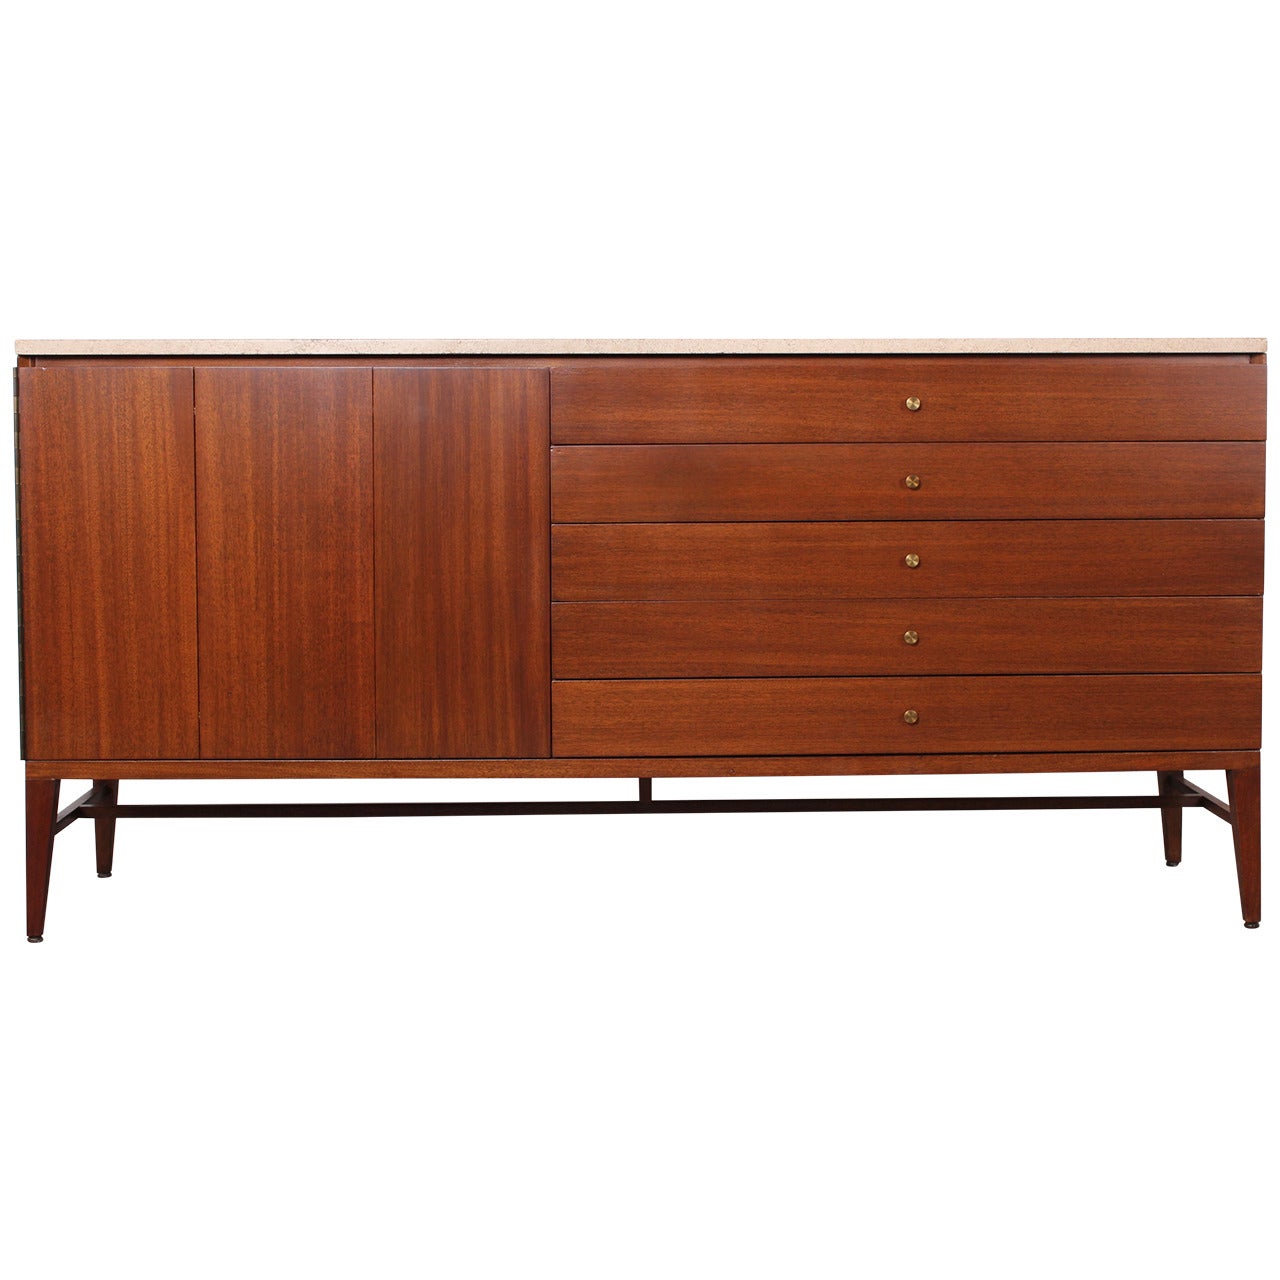 Mahogany Credenza by Paul McCobb with Travertine Top